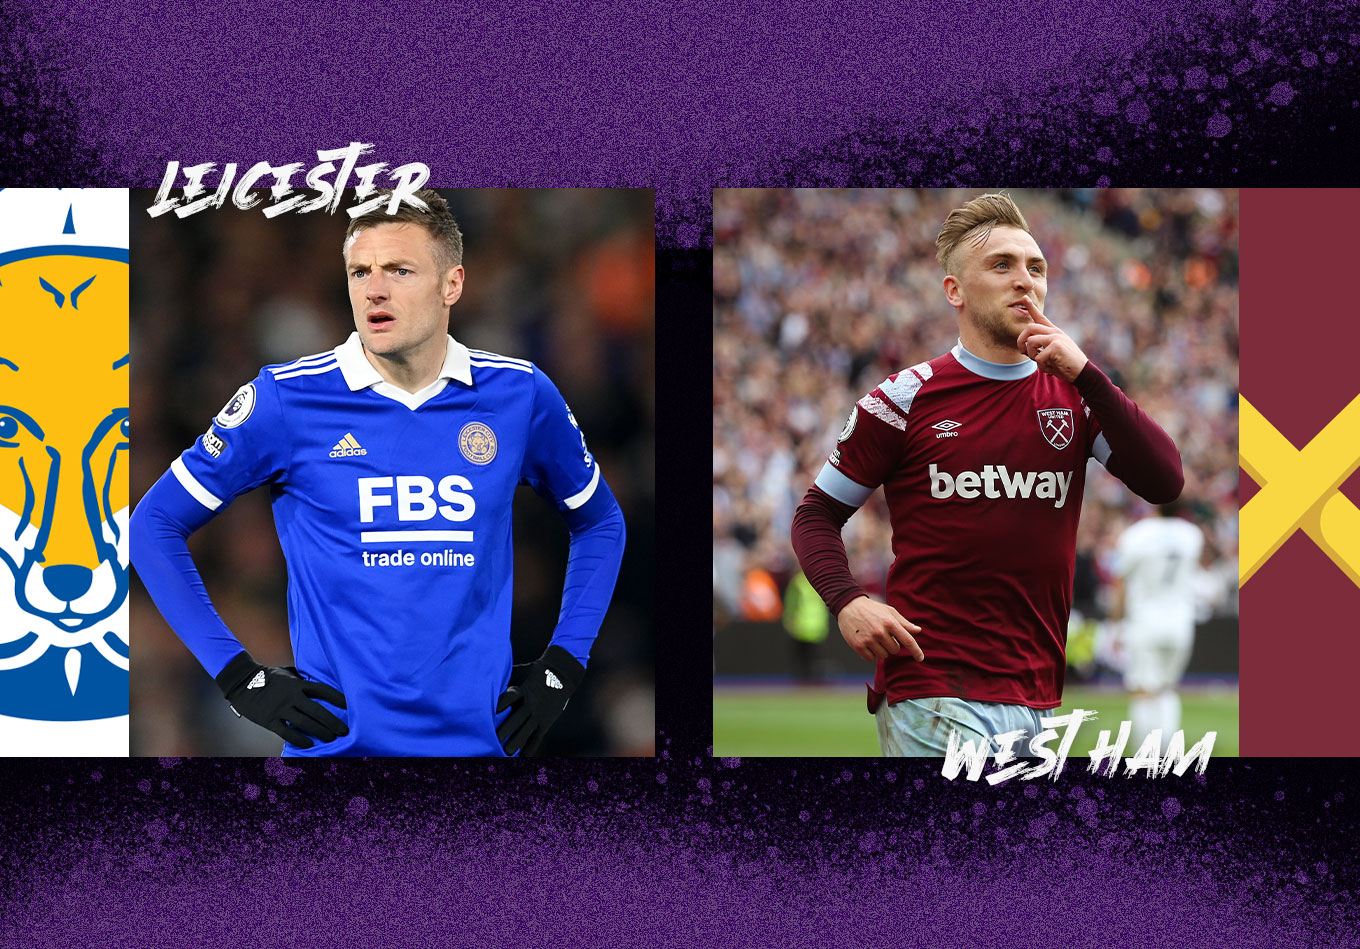 Leicester City vs West Ham: Prediction and Preview